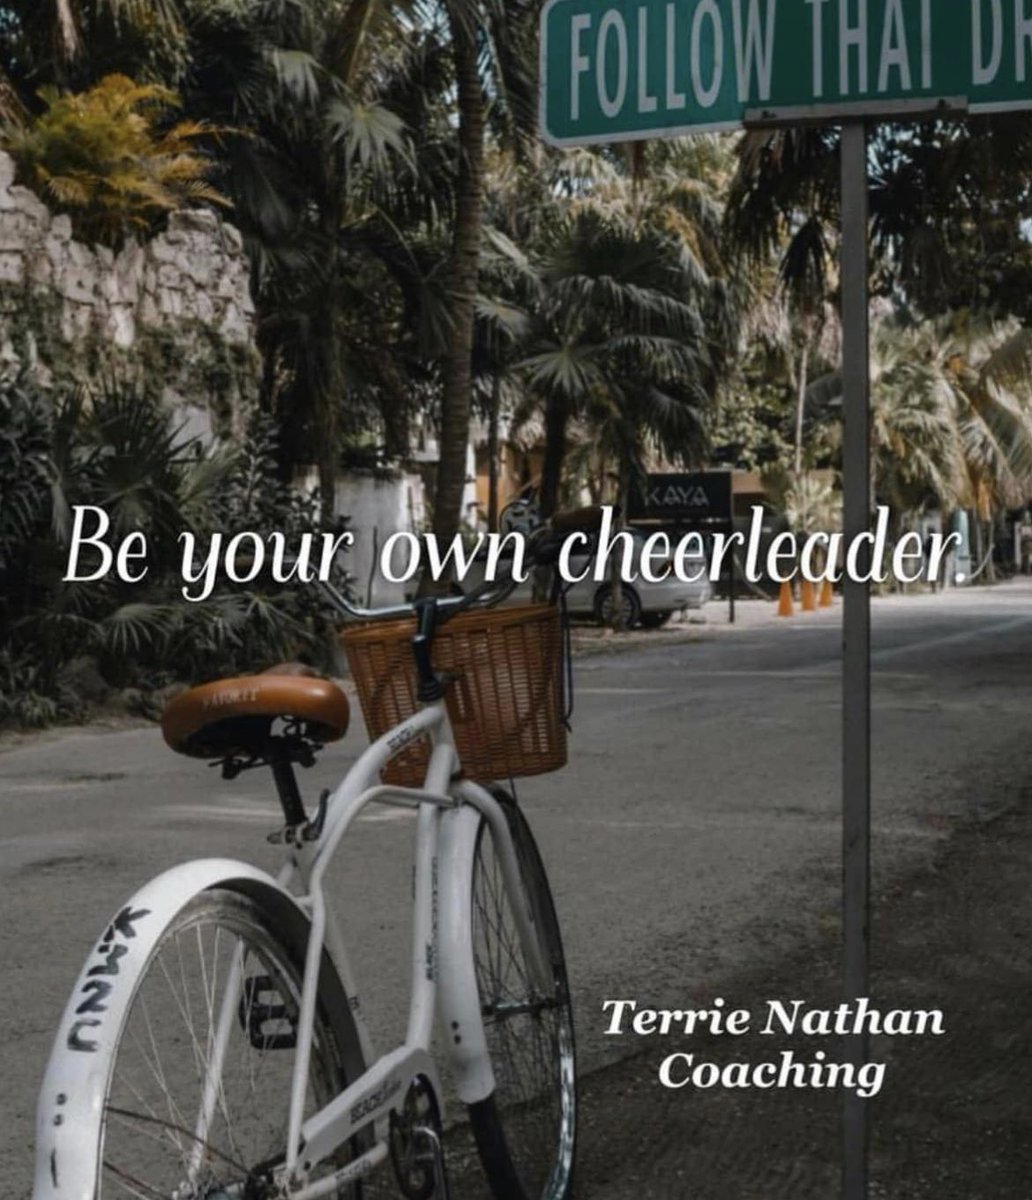 Never rely on others to determine your self-worth. #stronggirlspirit #cheerleader terrienathan.com